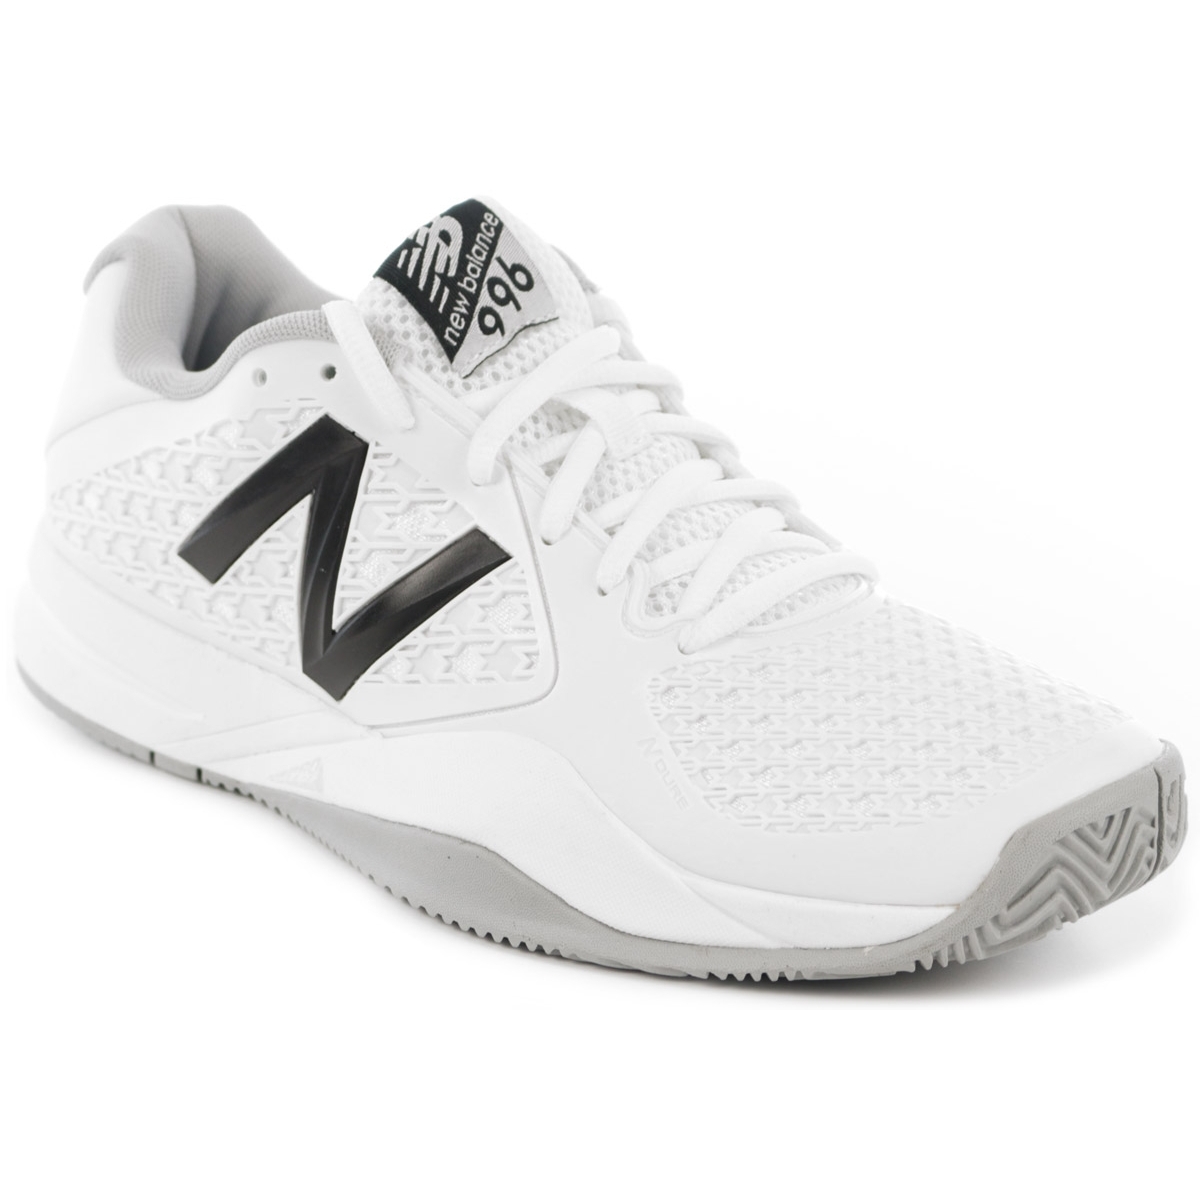 chaussures new balance homme blanche, Chaussures New Balance Femme WC996 Blanches ...